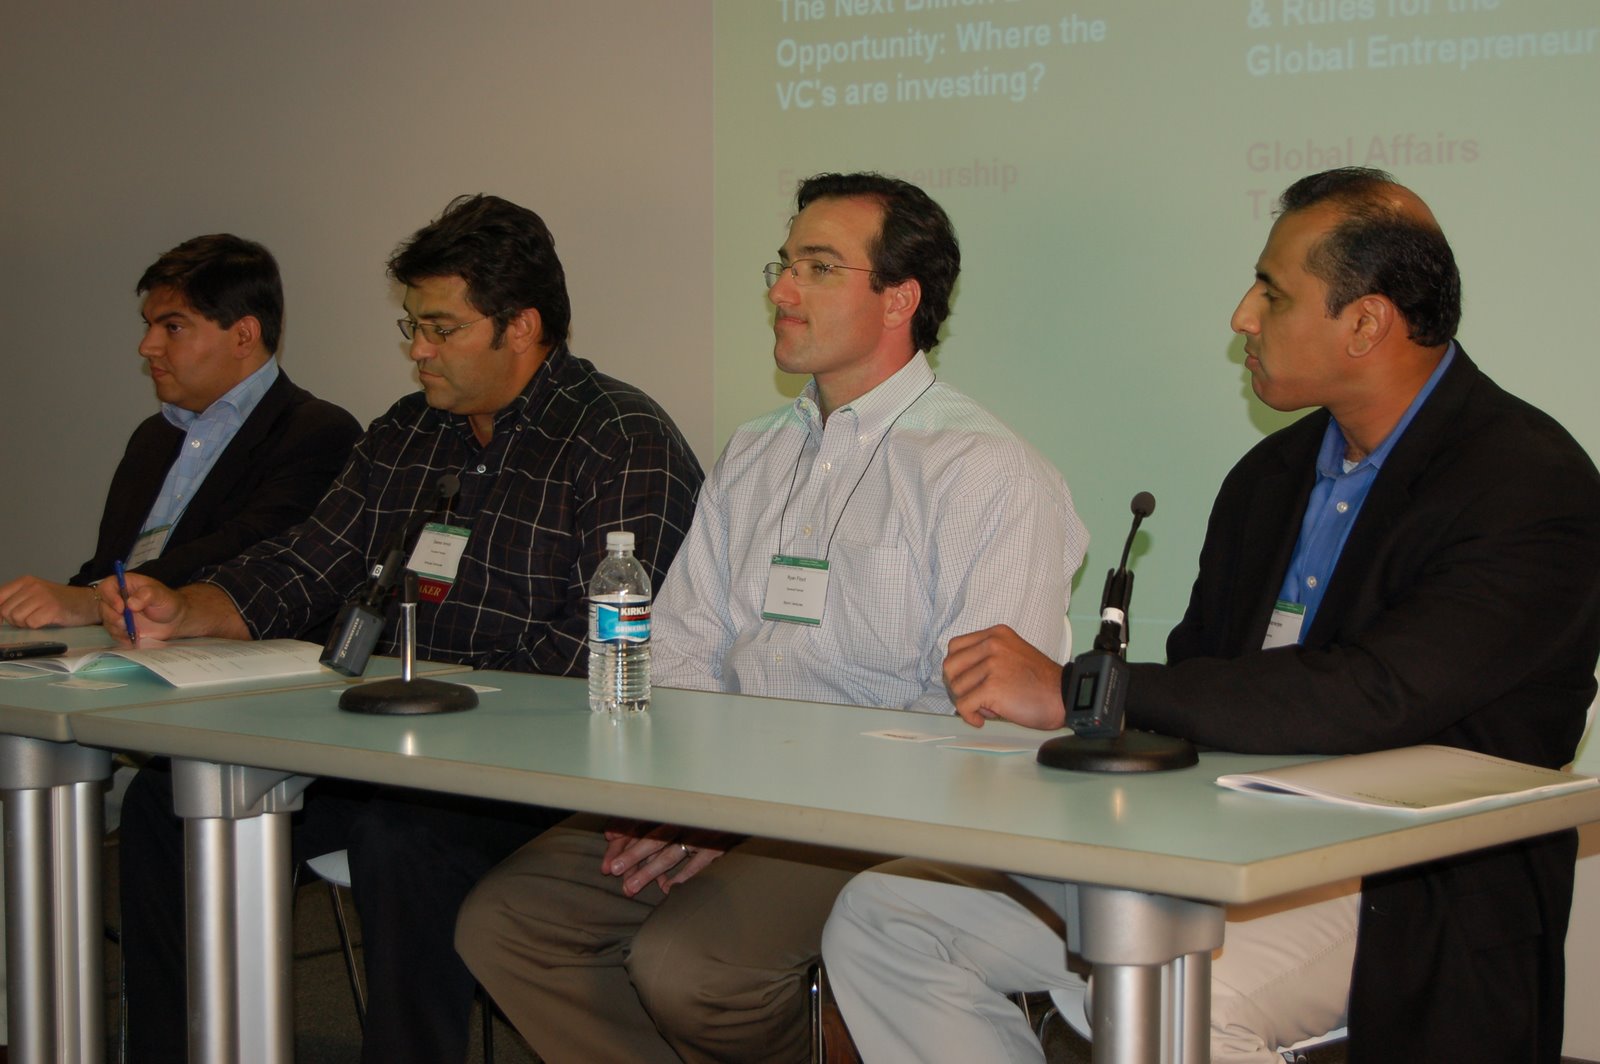 [Where+are+the+VCs+Investing,+panel.JPG]